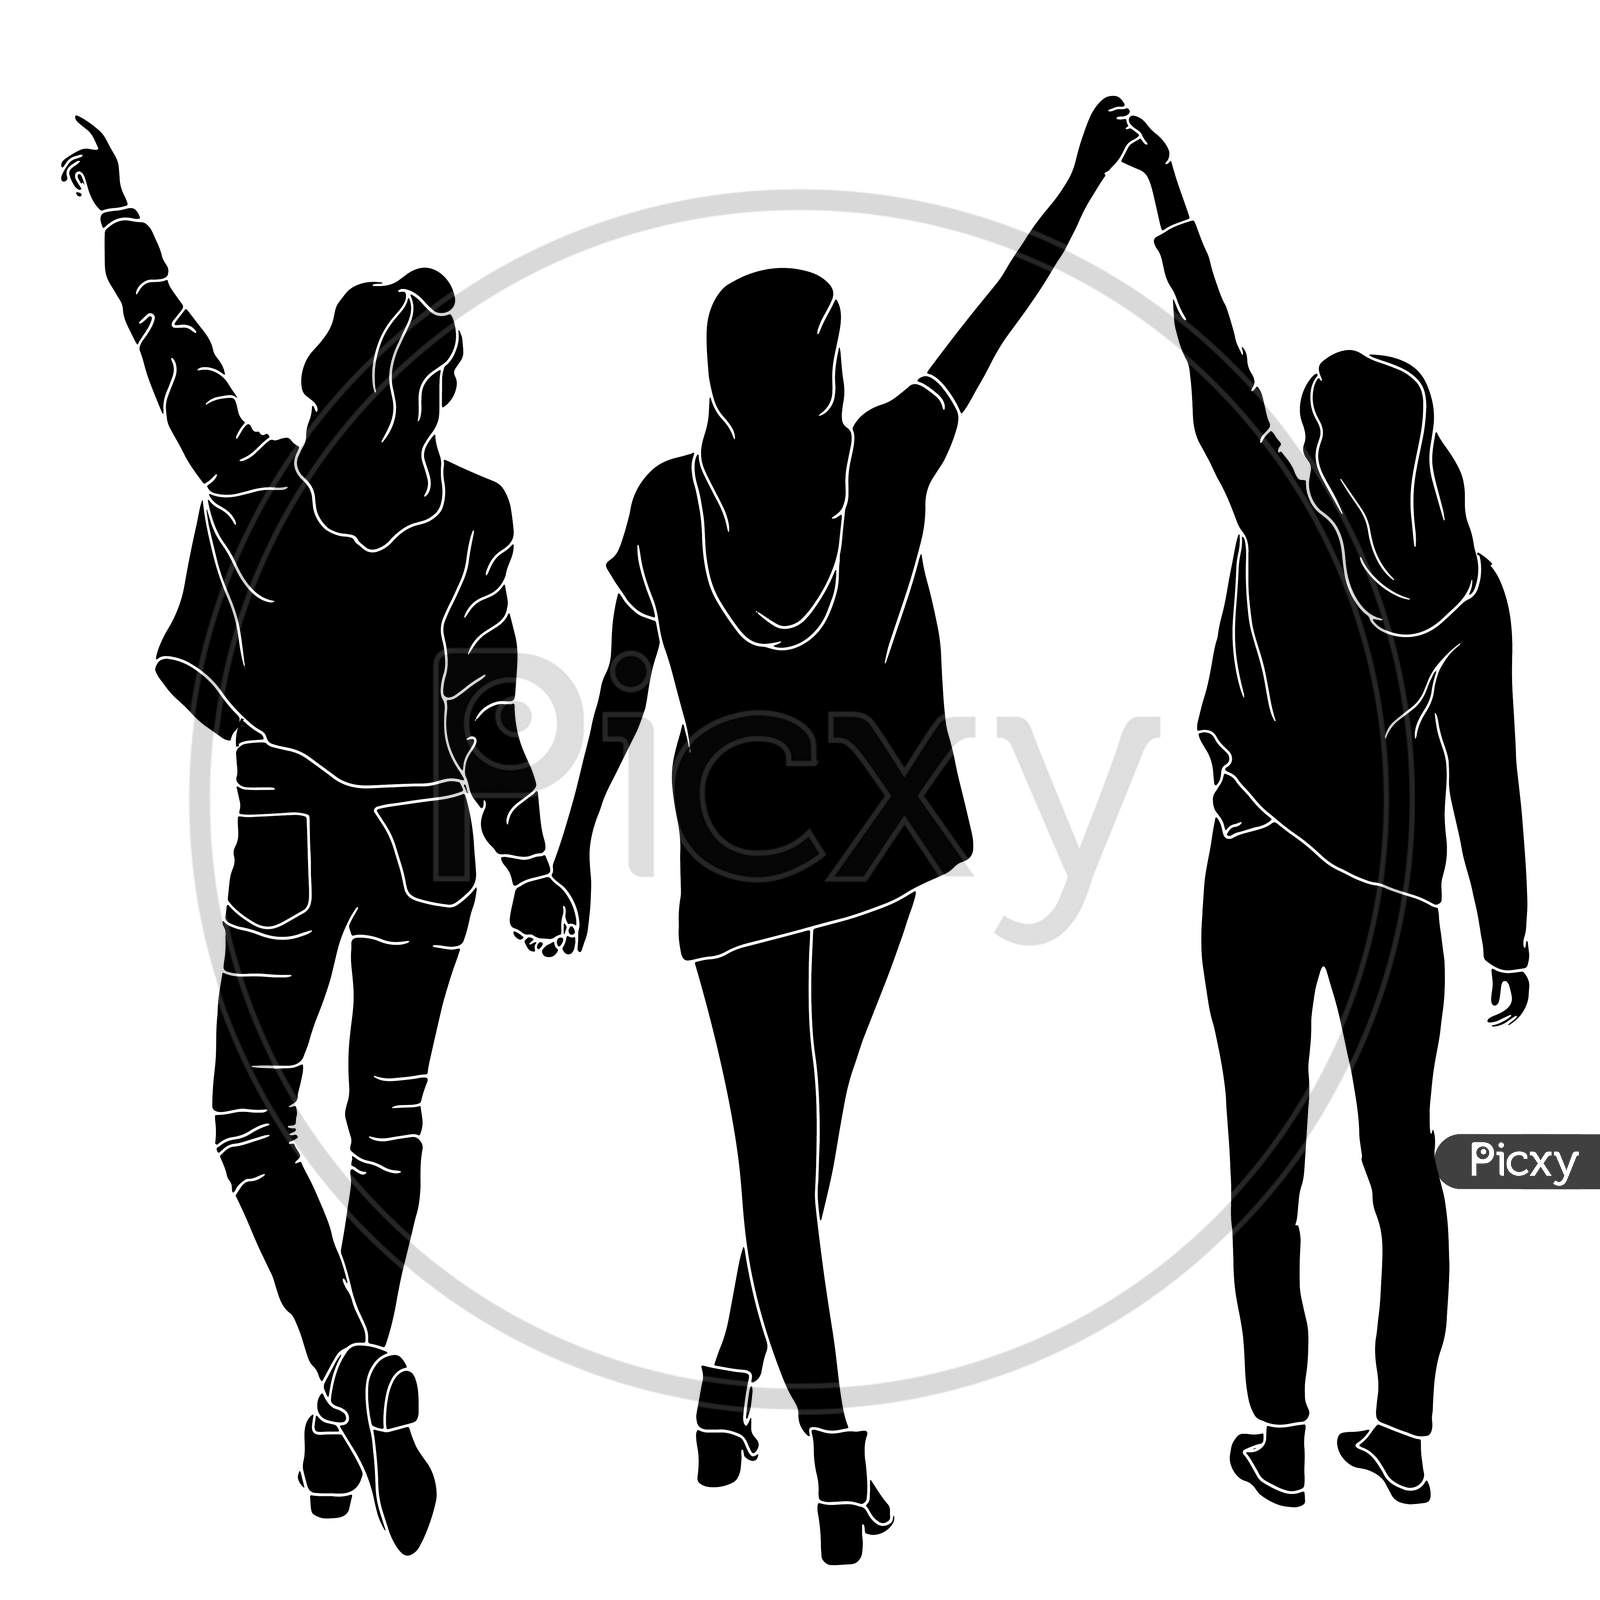 Three Girls Weaving Their Hands In The Air, The Silhouette Of People For Friendship Day. Hand-Drawn Character Illustration Of Happy People.